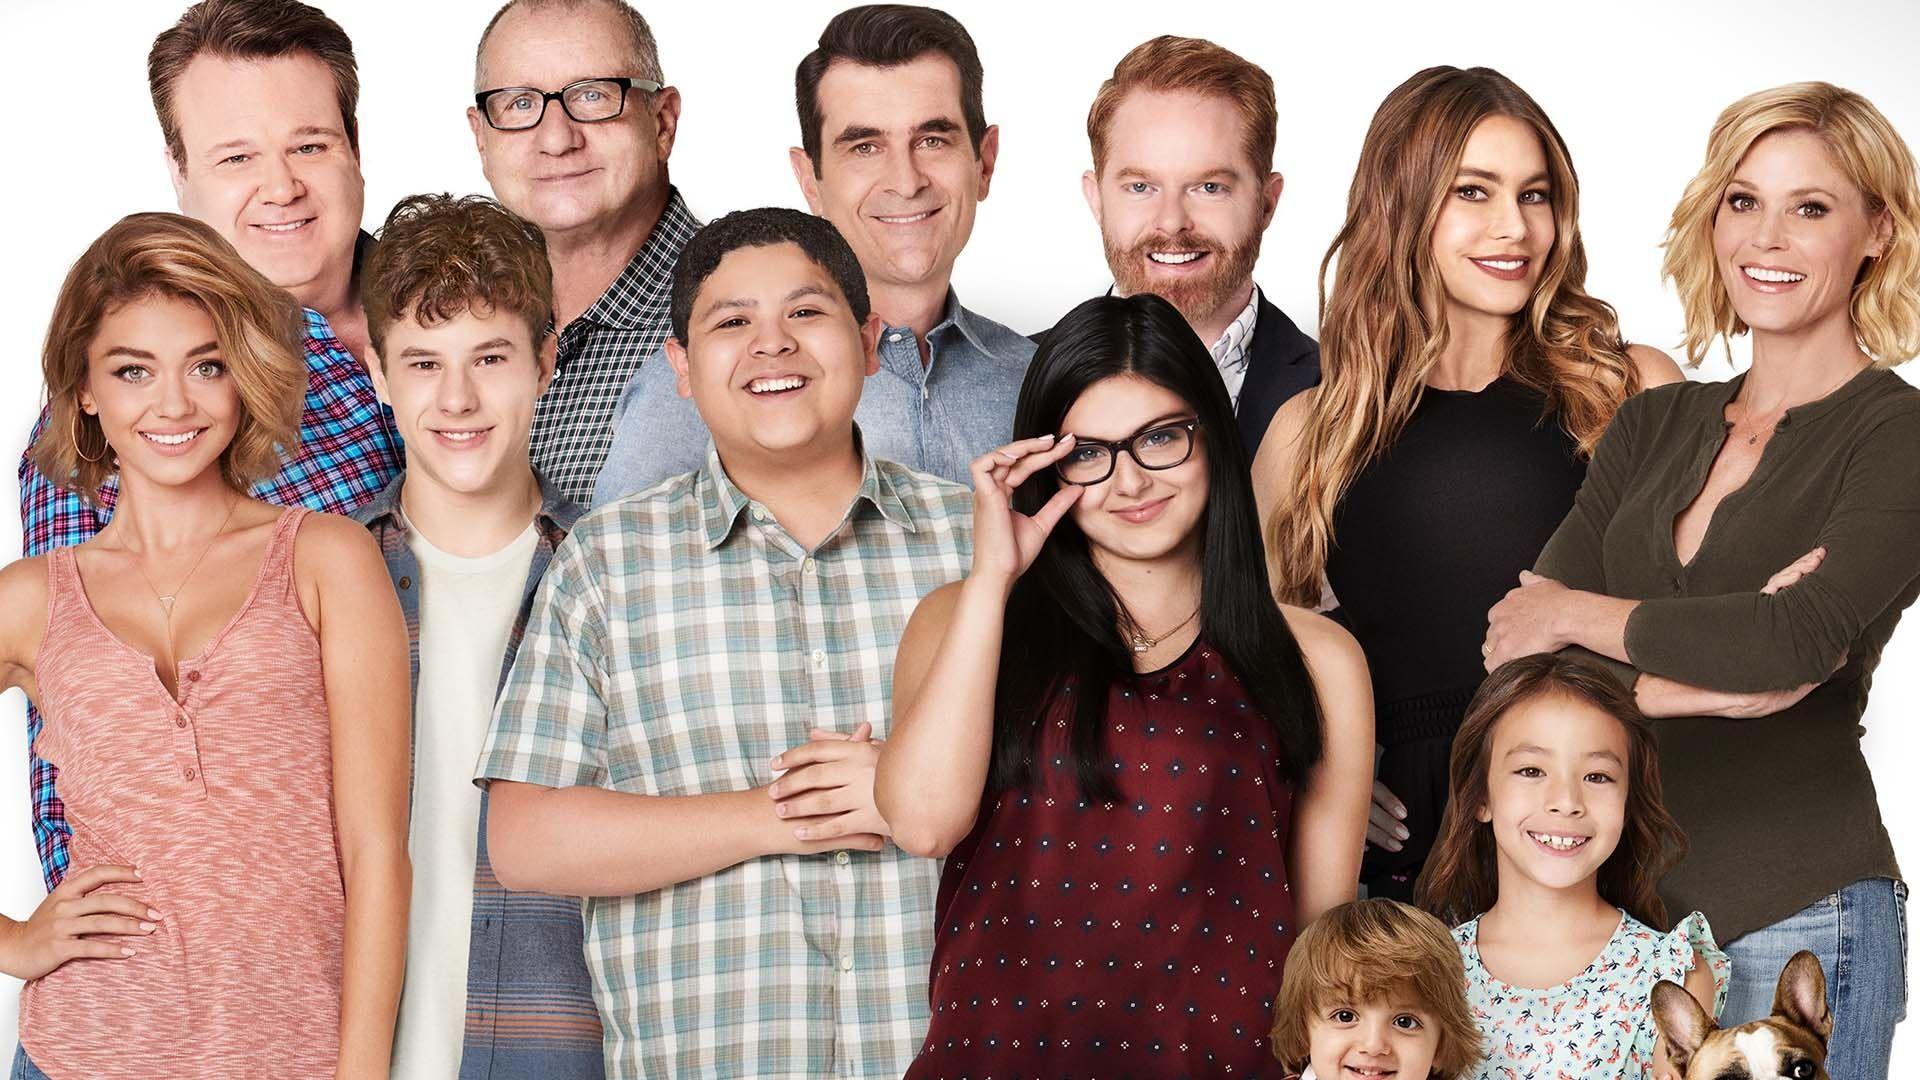 Modern Family Wallpapers Top Free Modern Family Backgrounds Images, Photos, Reviews